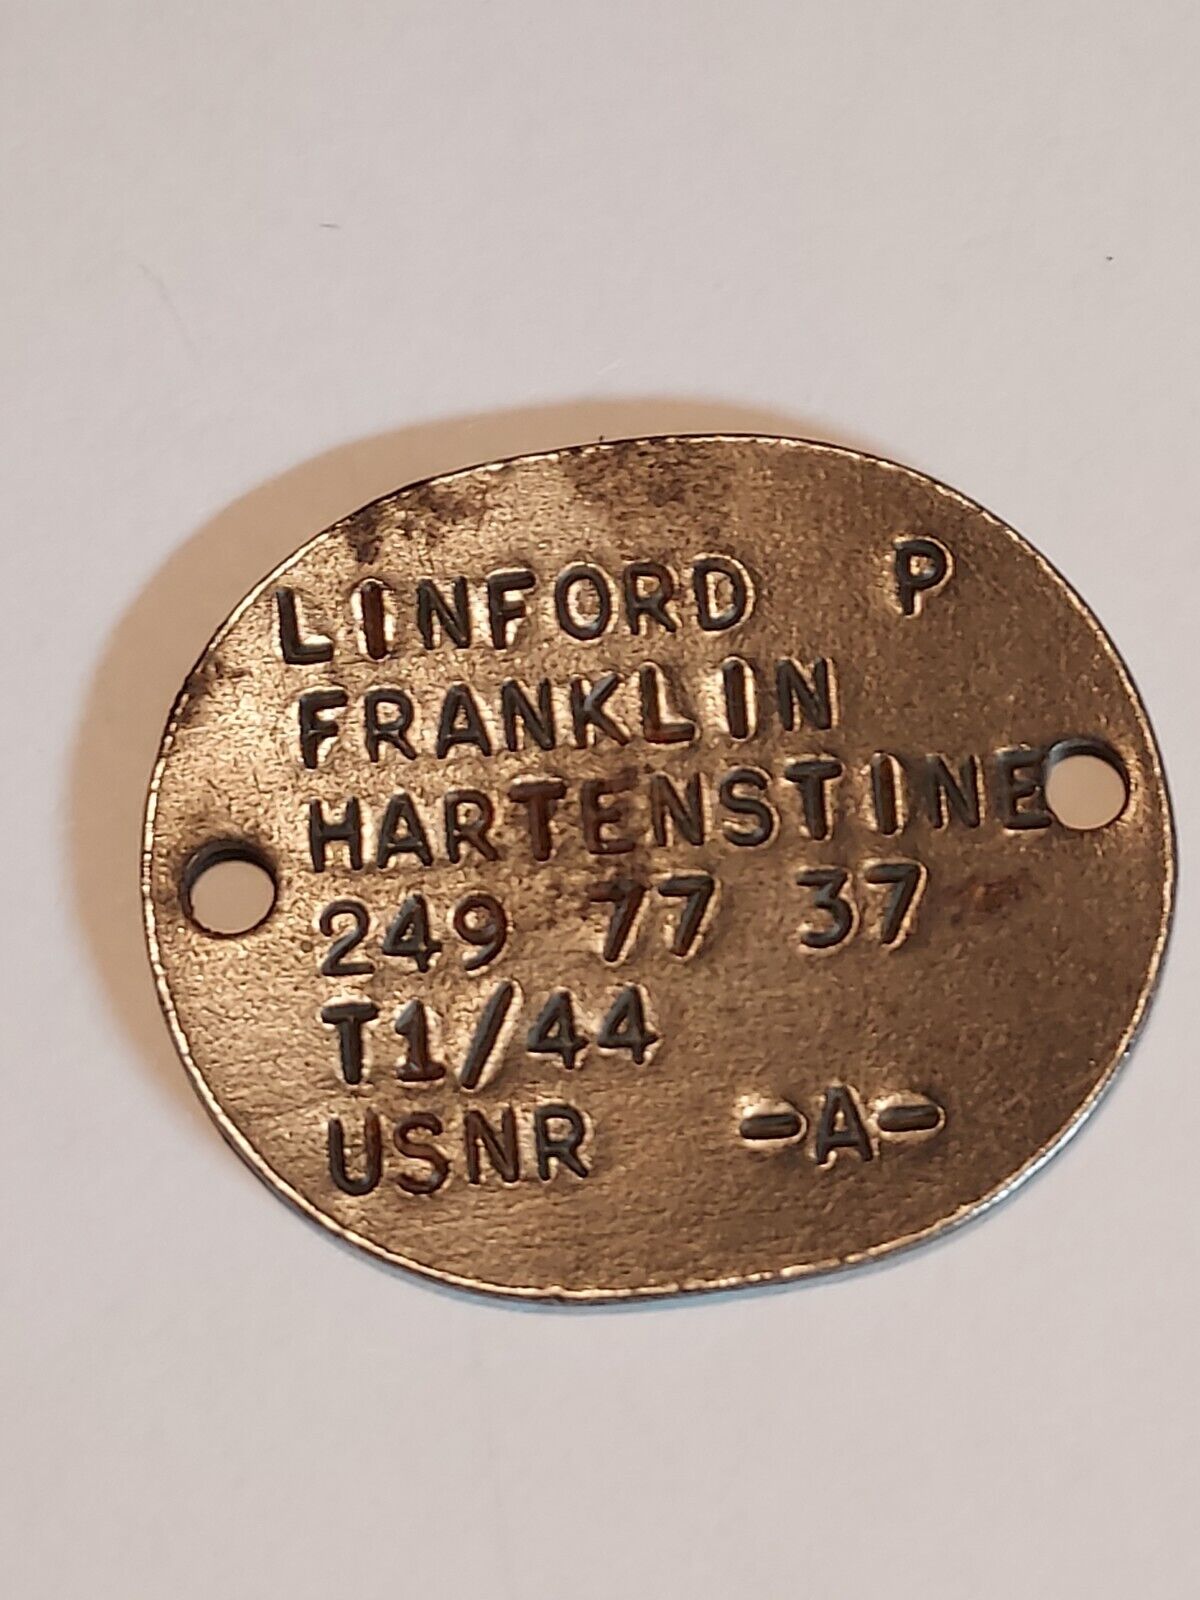 WWII 1944 USNR DOGTAG  - Owner identified -  in USA